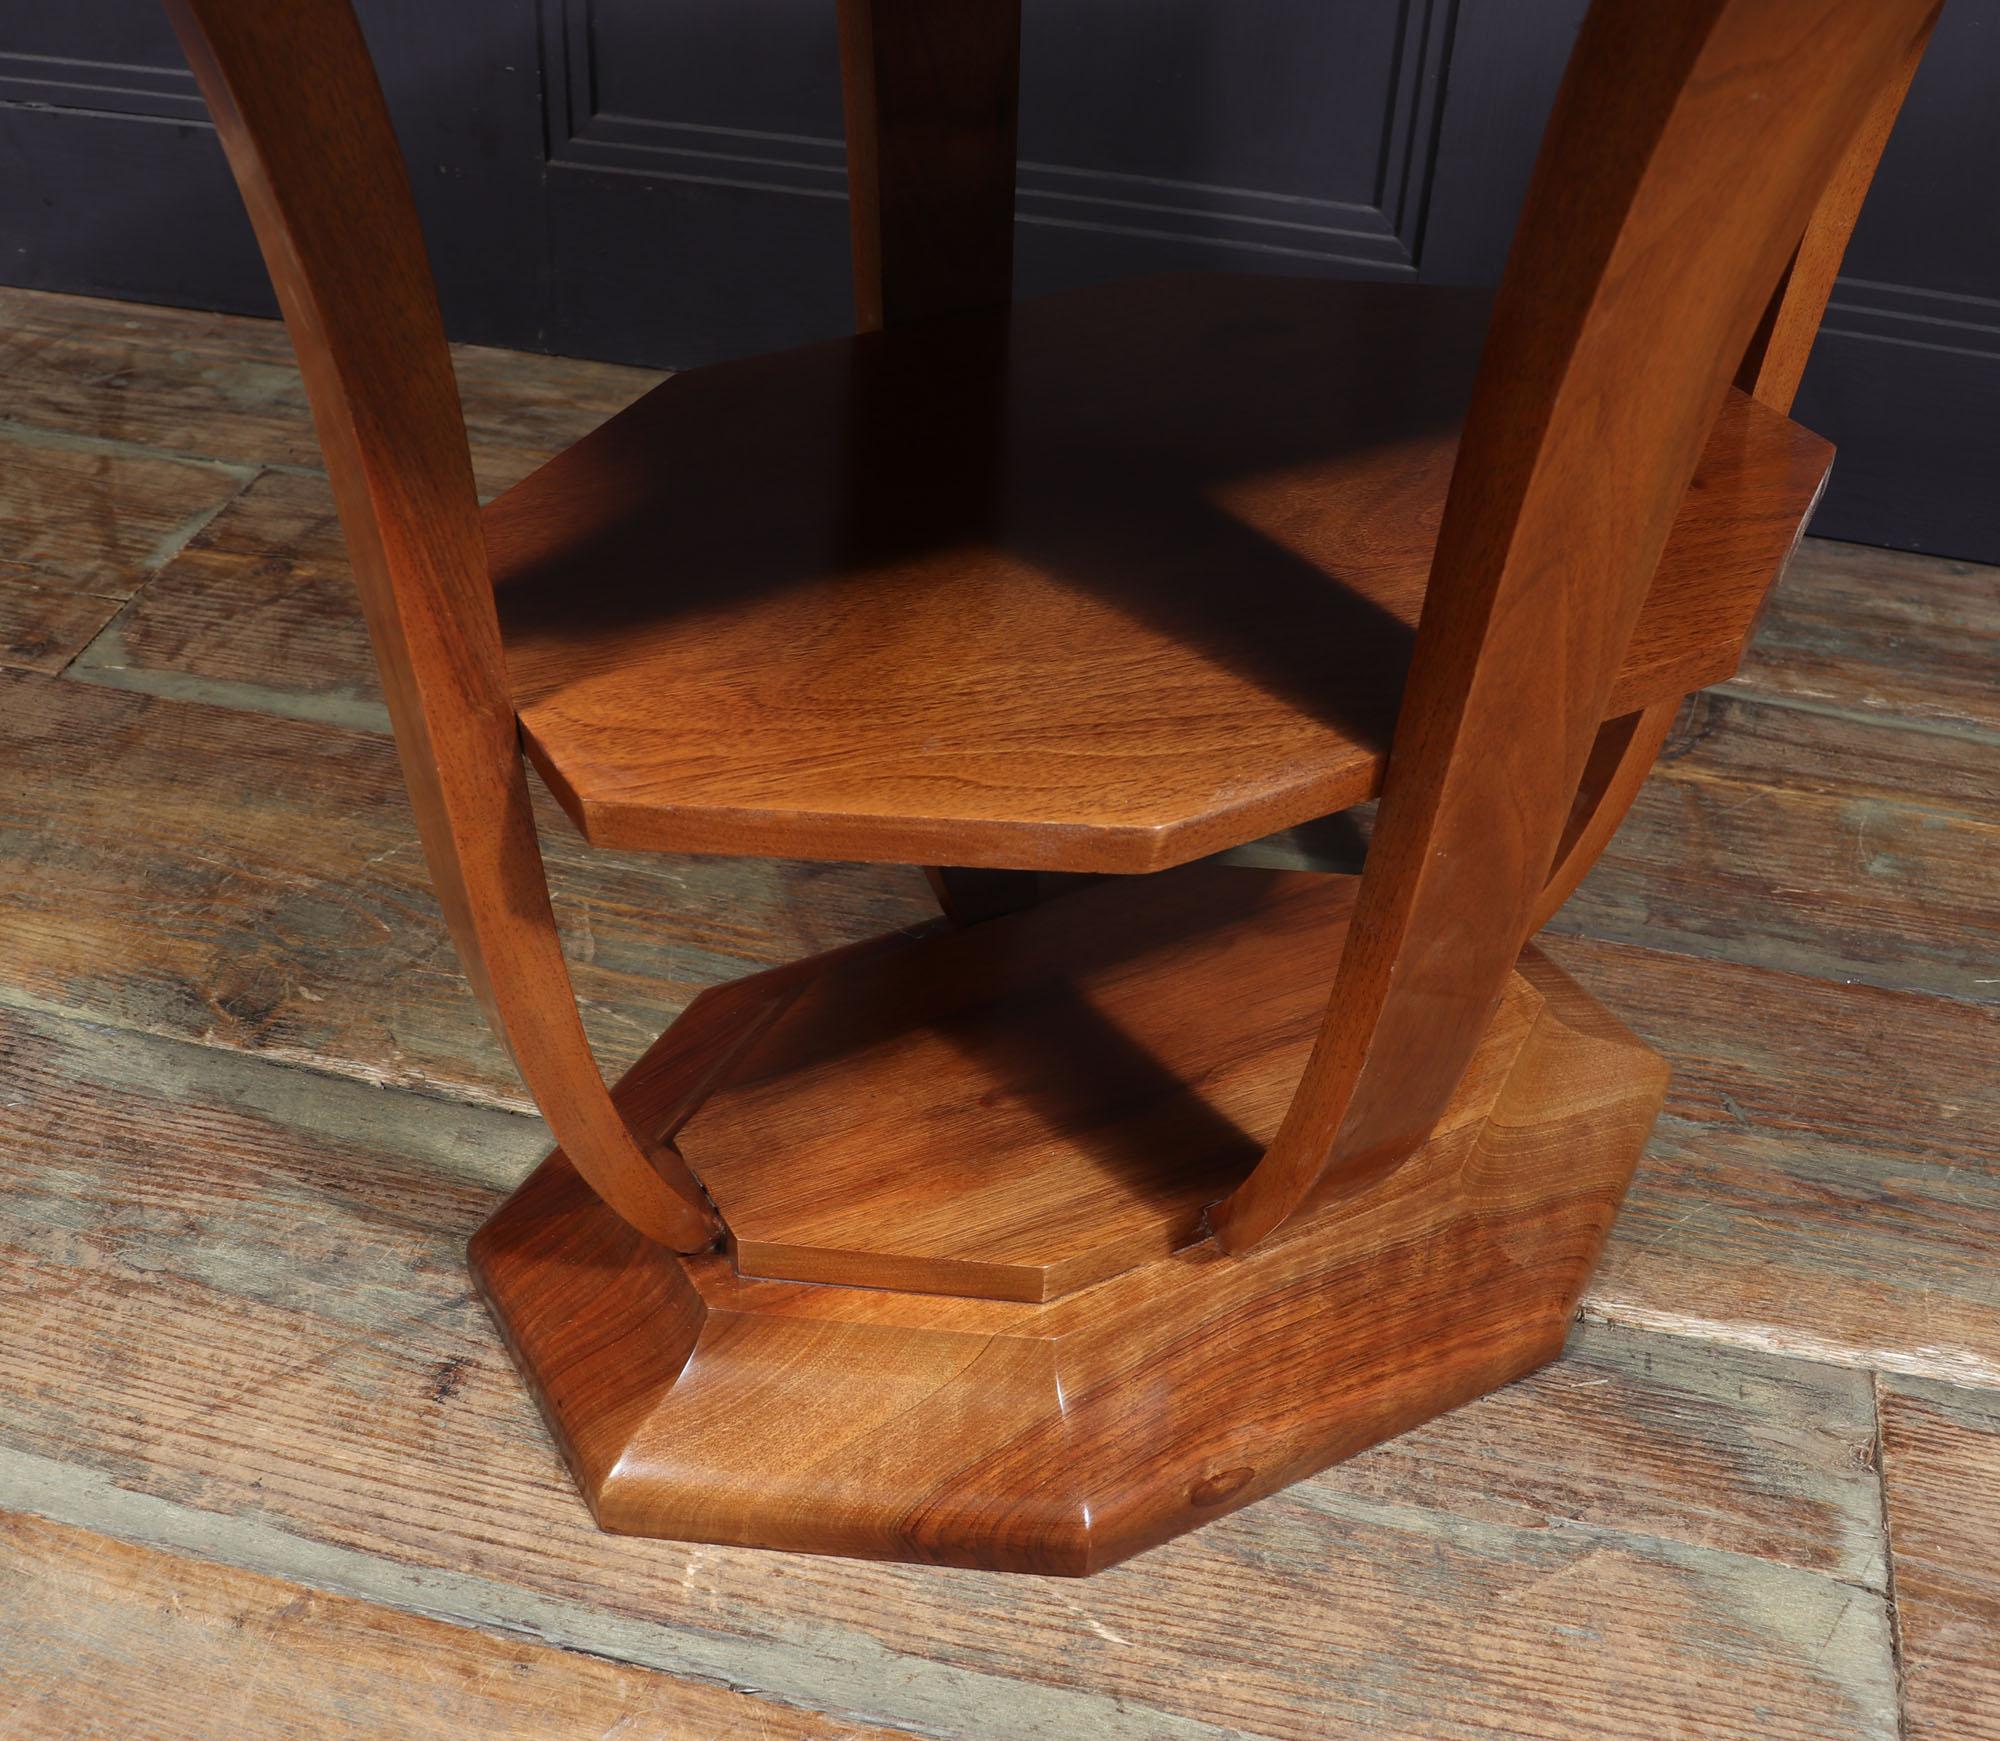 This French Art Deco walnut occasional table is a timeless piece that will add sophistication and elegance to any space. Its beautiful walnut wood finish is complemented by the two tiers, shaped uprights and heavy solid base, making it both